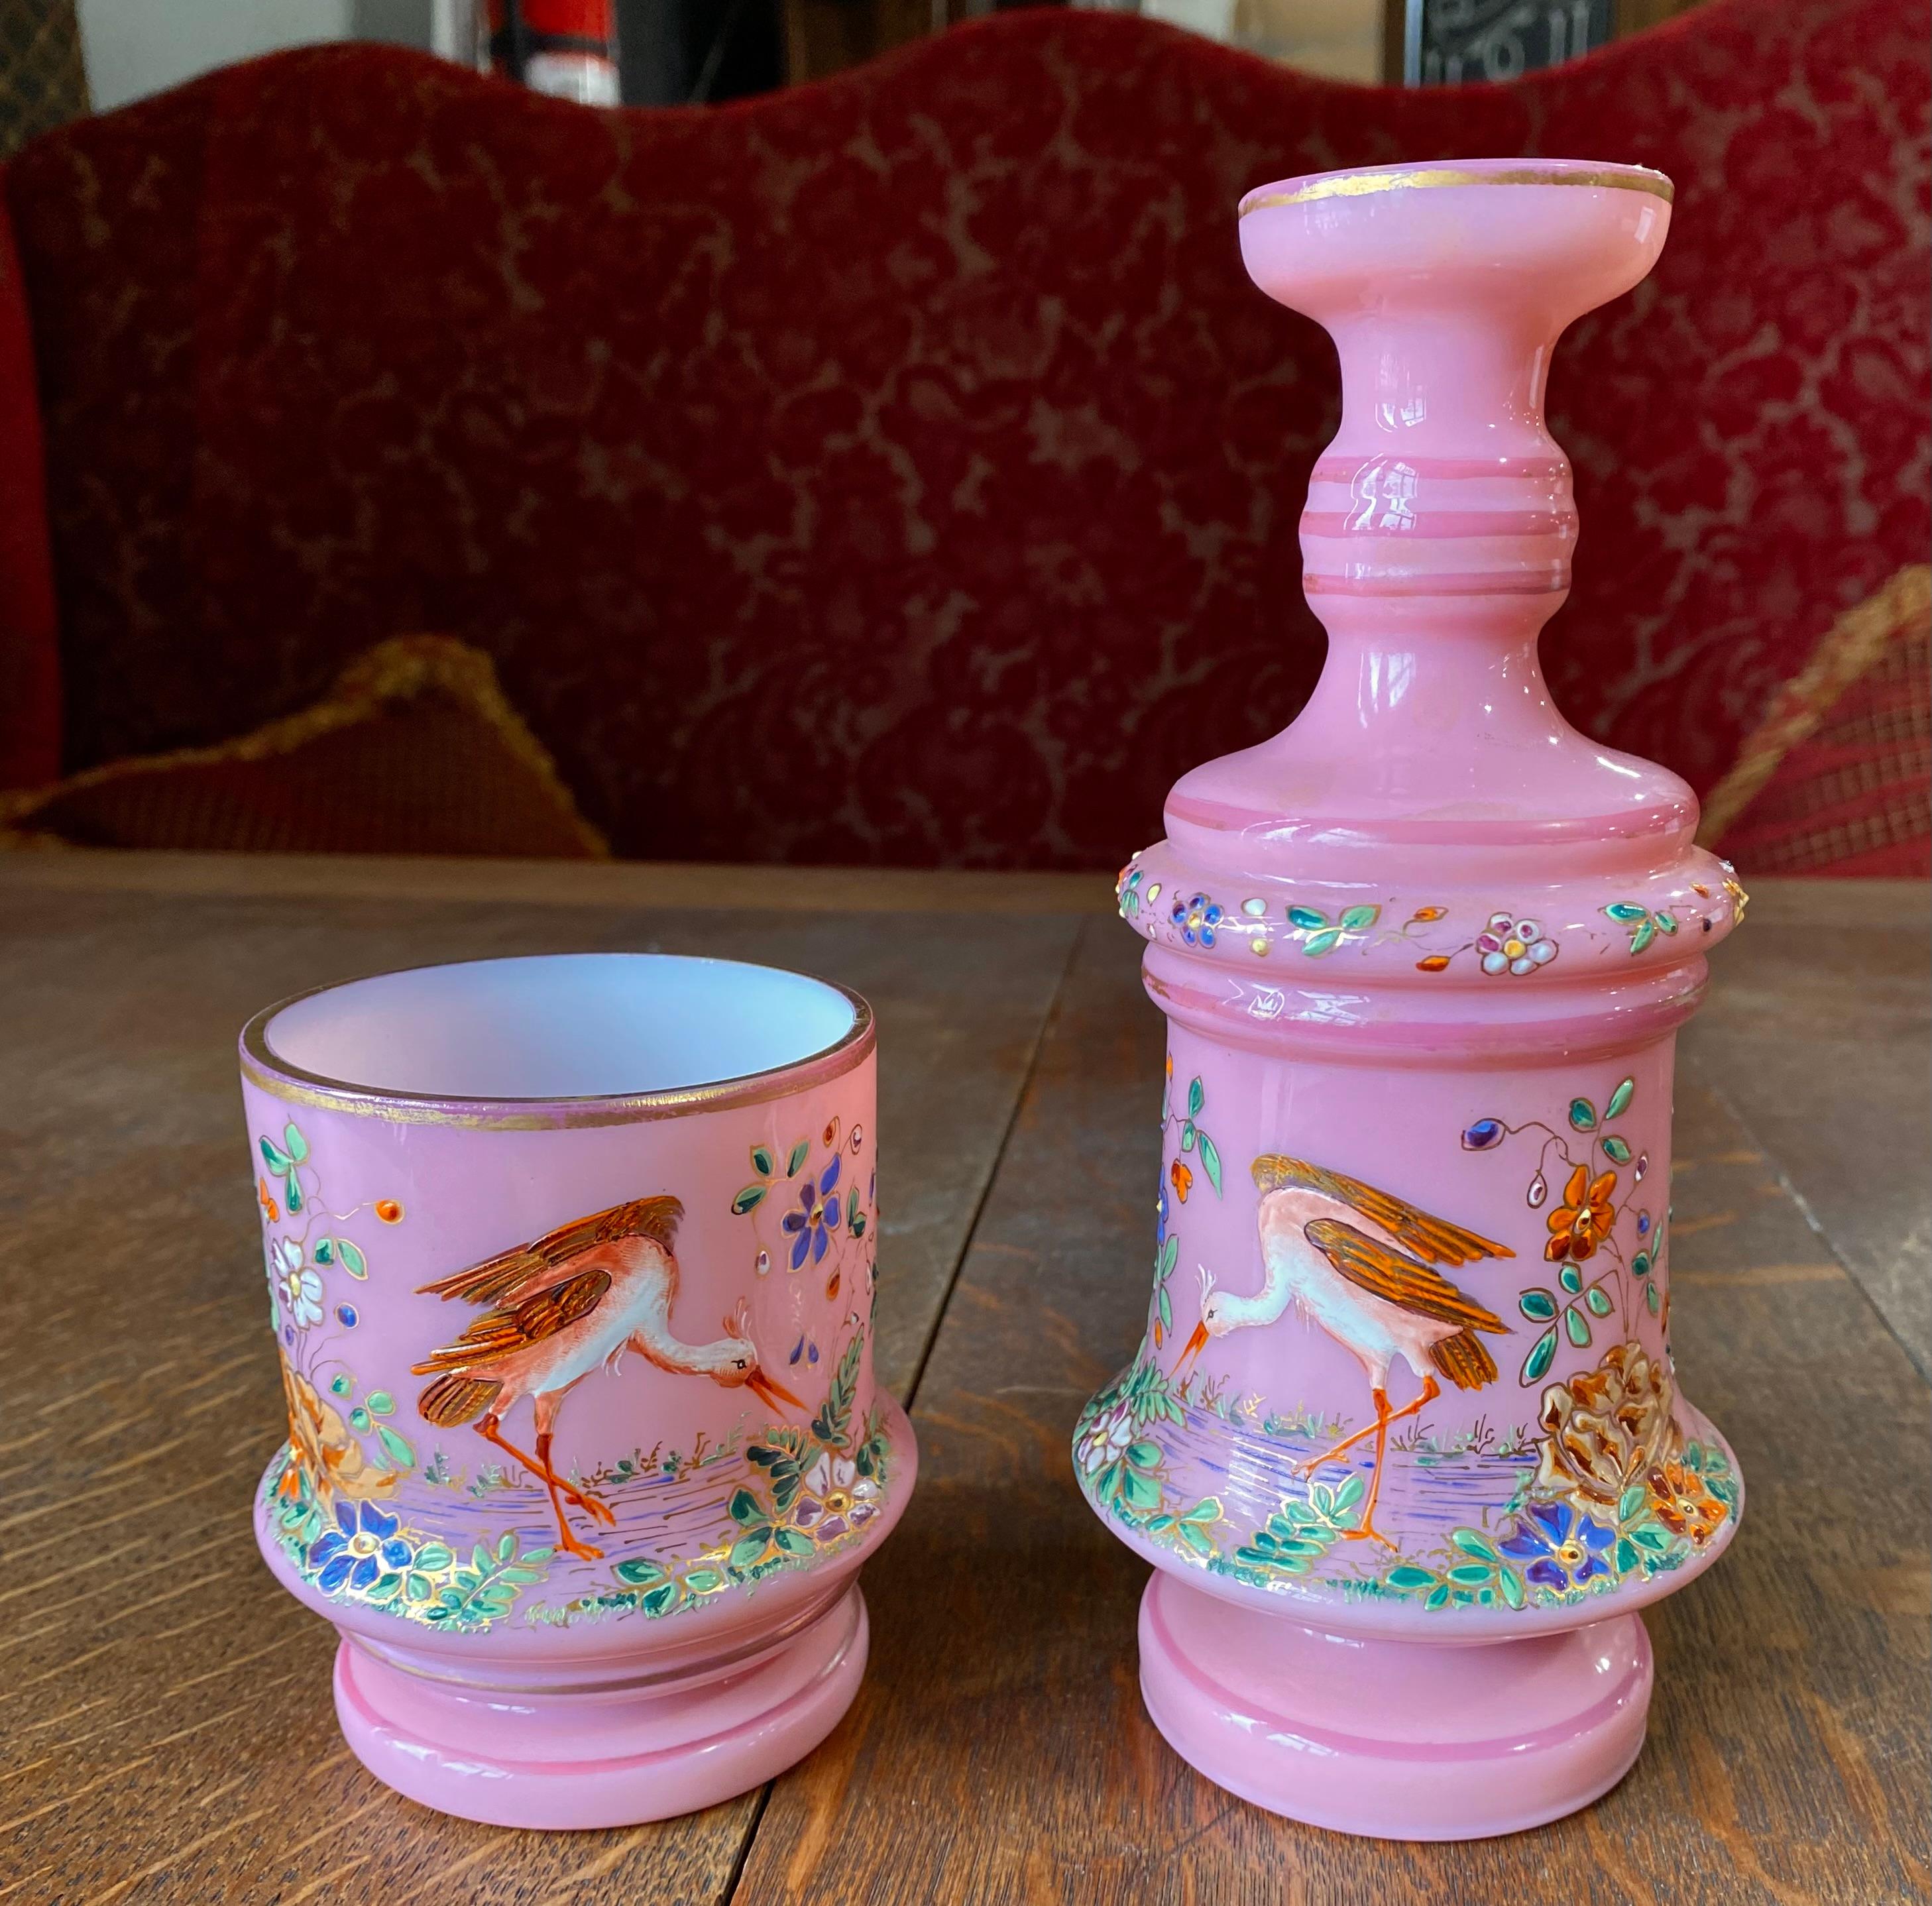 An exceptional and rare Moser Bohemia bedside carafe and associated drinking glass of enameled opaline glass in an exquisite pink color, the circular body beautifully hand painted all around the two pieces and with gold gilt.

Moser is a luxury